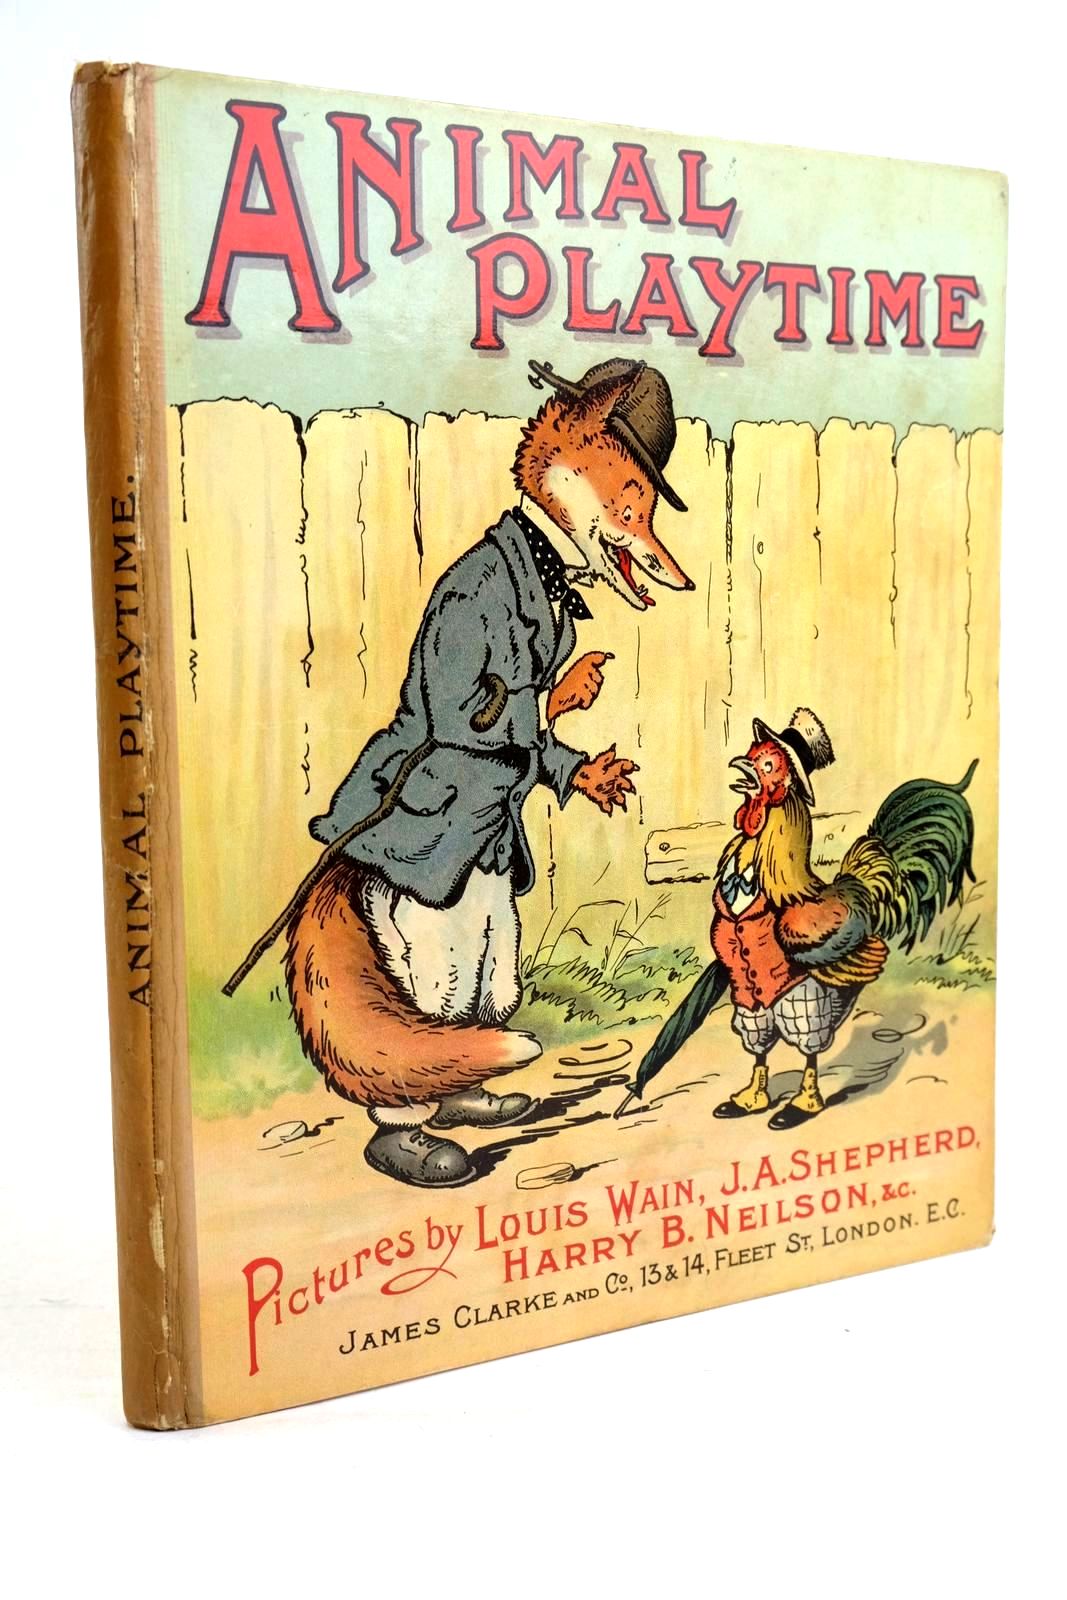 Photo of ANIMAL PLAYTIME illustrated by Wain, Louis Neilson, Harry B. Shepherd, J.A. et al., published by James Clarke &amp; Co. (STOCK CODE: 1320518)  for sale by Stella & Rose's Books